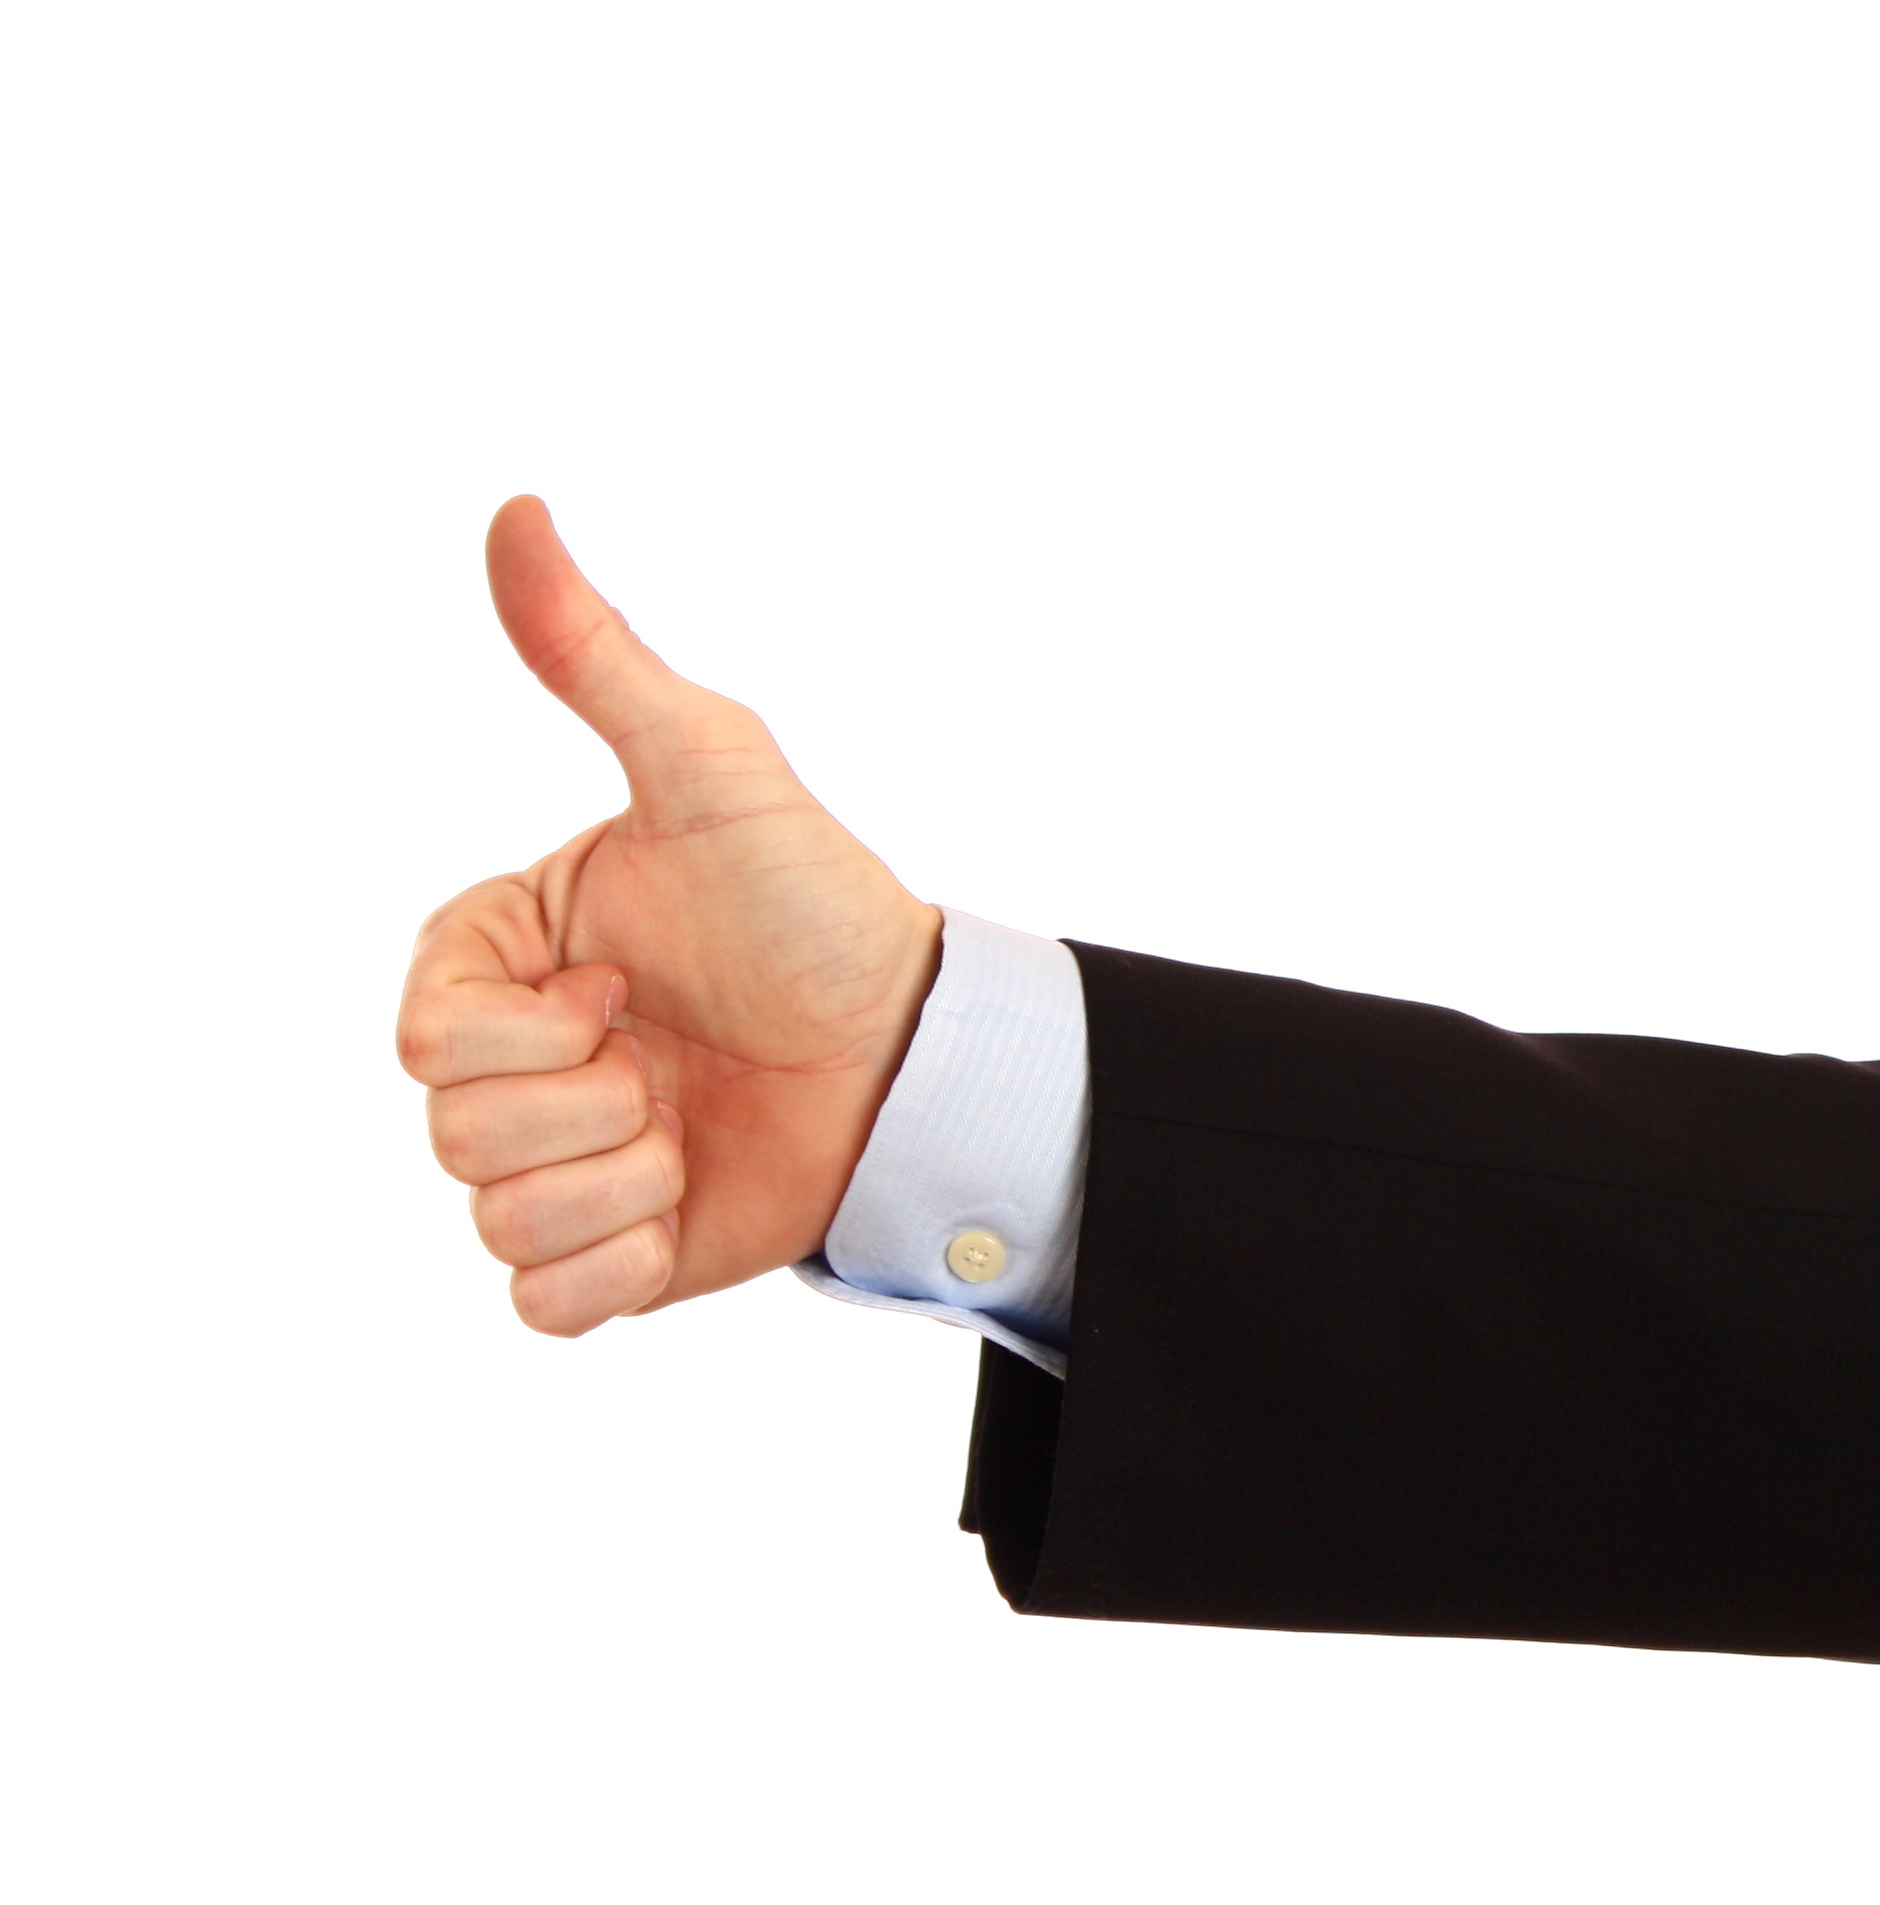 Thumbs Up, Business, Clothing, Gestures, Hands, HQ Photo